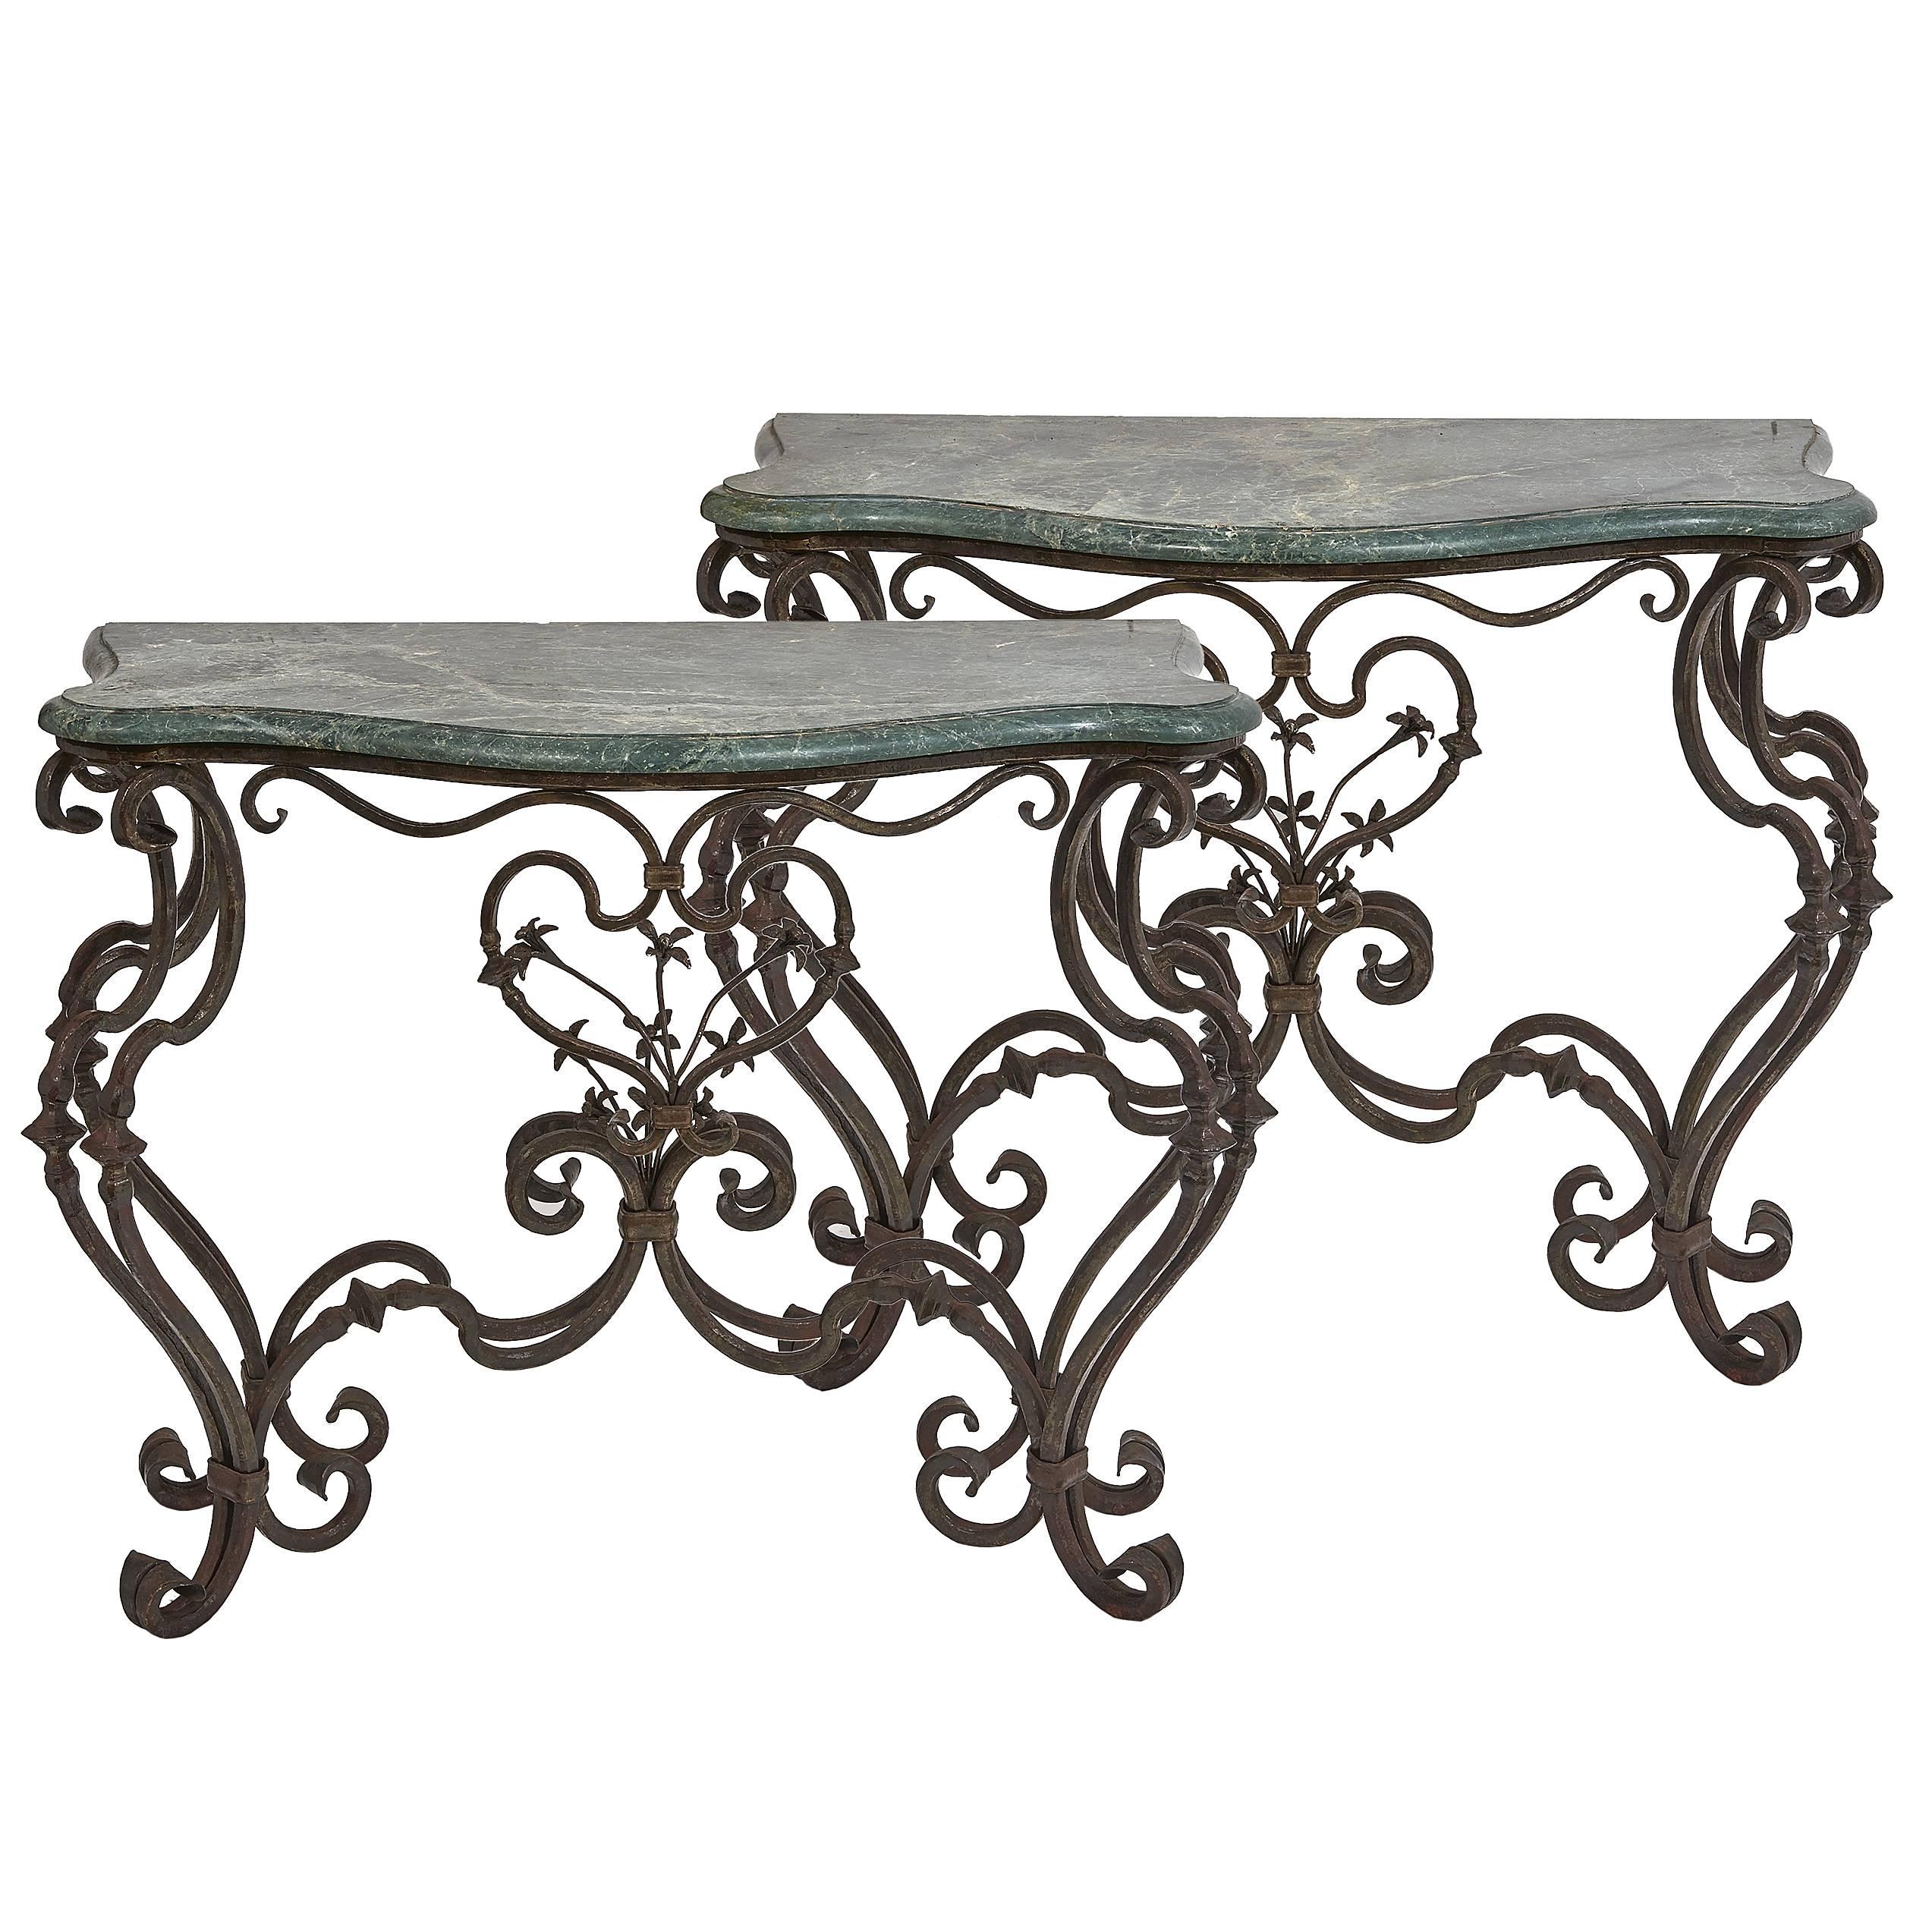 Pair of Italian Rococo Style Wrought Iron Console Tables, circa 1900